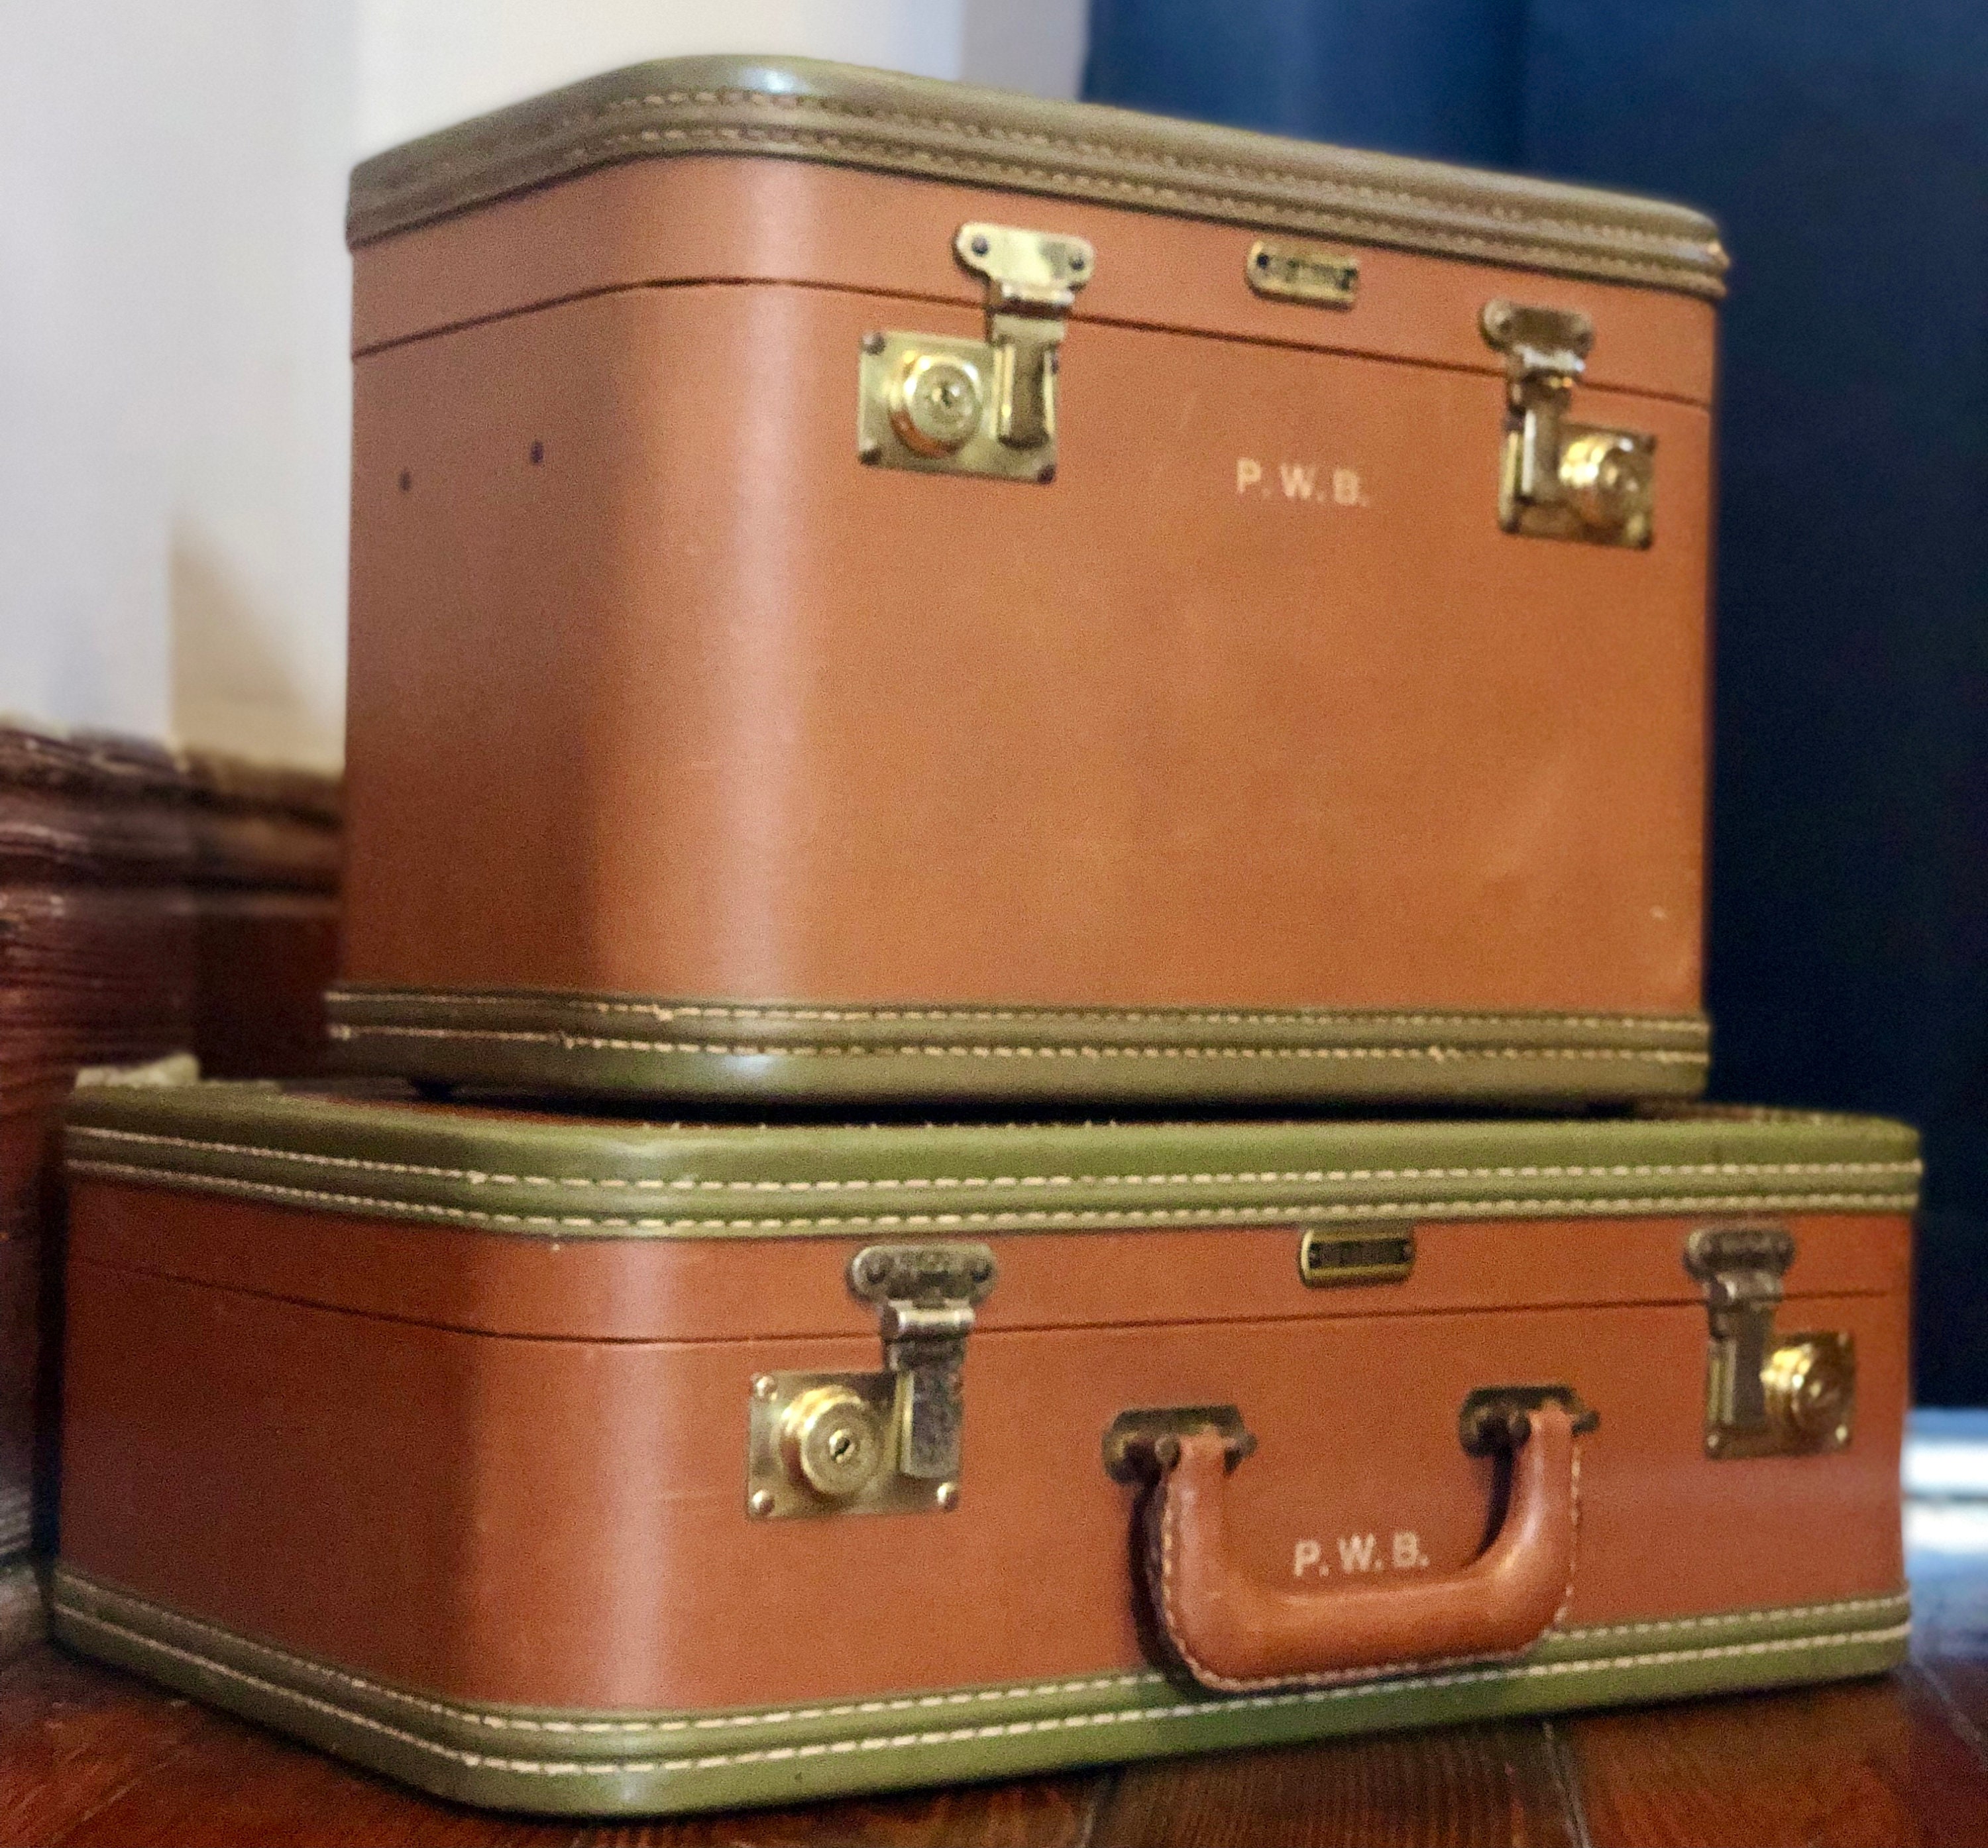 Classy Cool Vintage Luggage